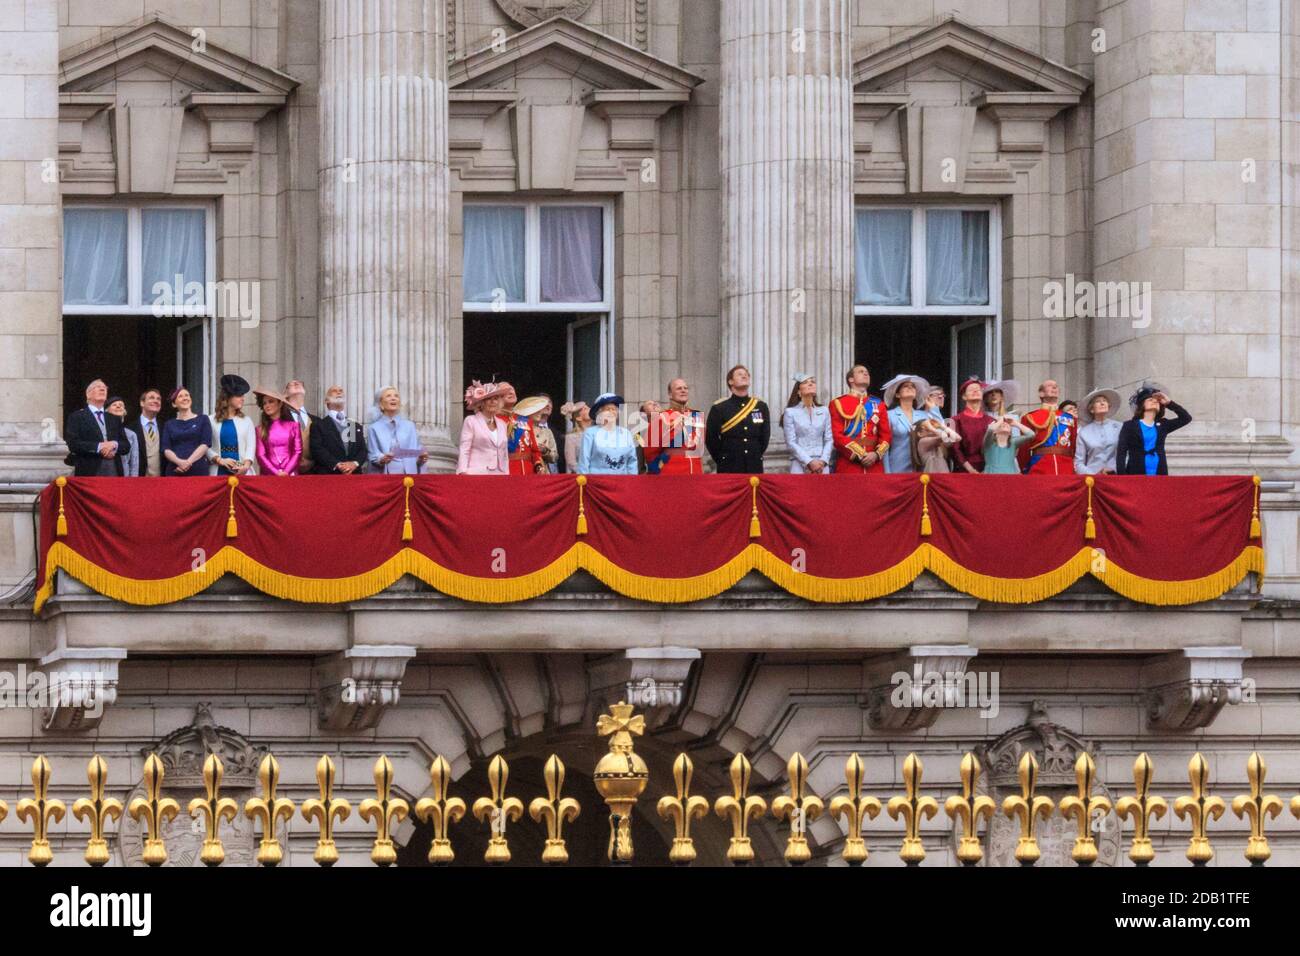 Her Majesty Queen Elizabeth II, Prince Philip and the British Royal Family on the balcony of Buckingham Palace during the flypast, Trooping the Colour Stock Photo